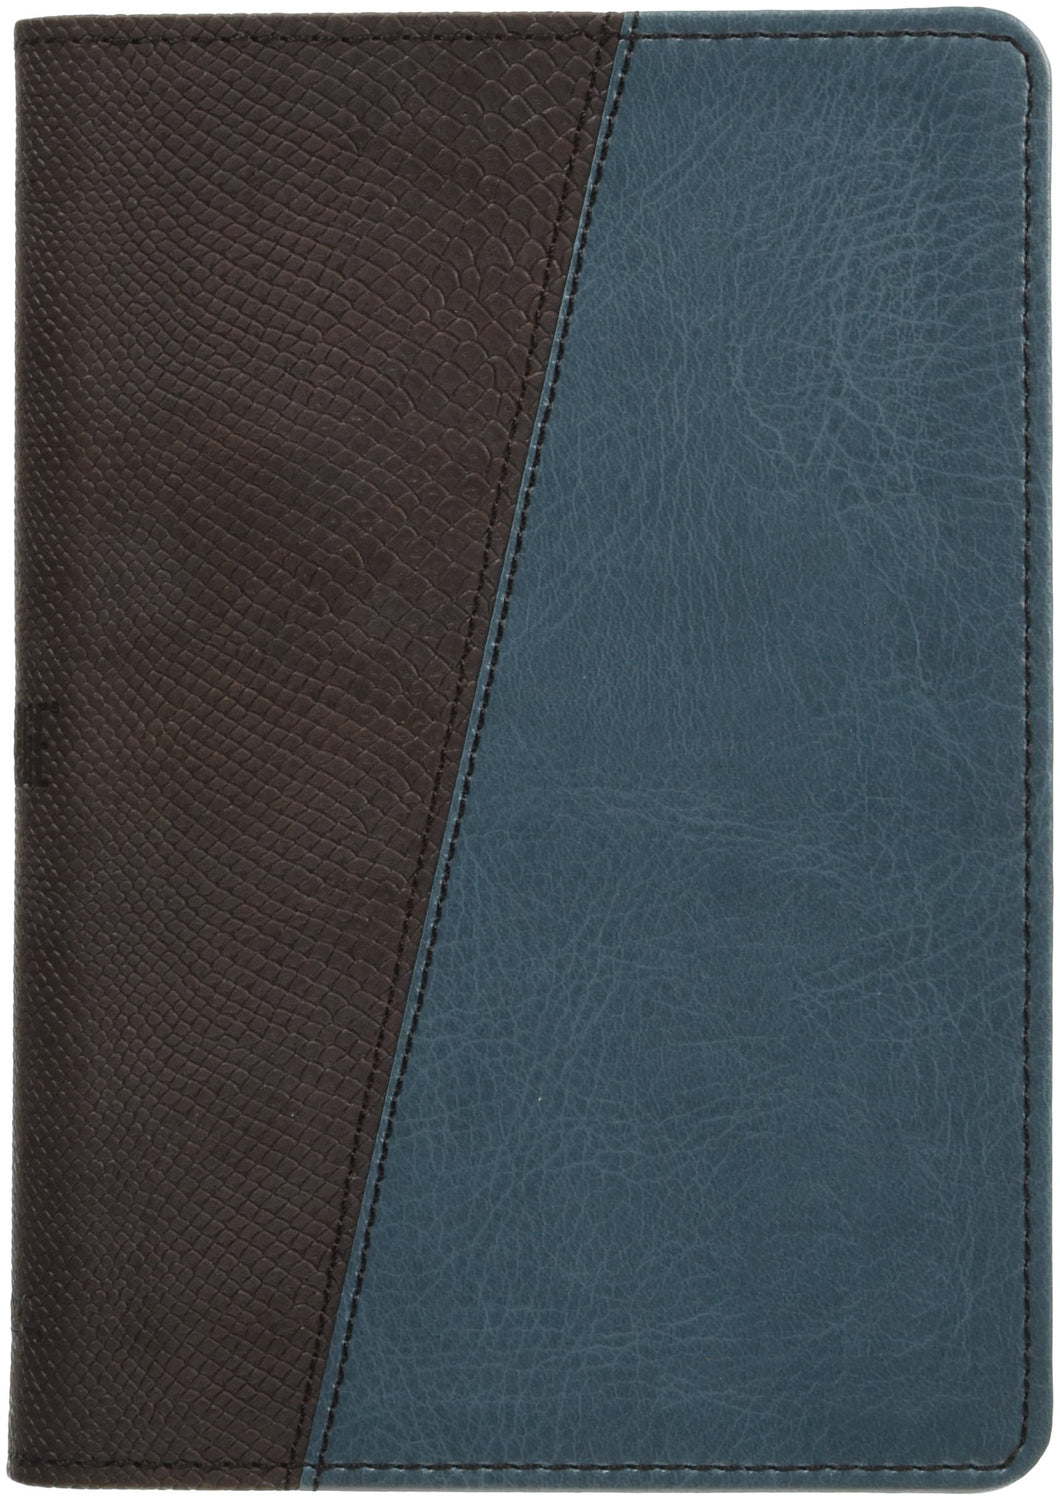 Message Bible Compact Leather Binding: The Bible in Contemporary Language Imitation Leather